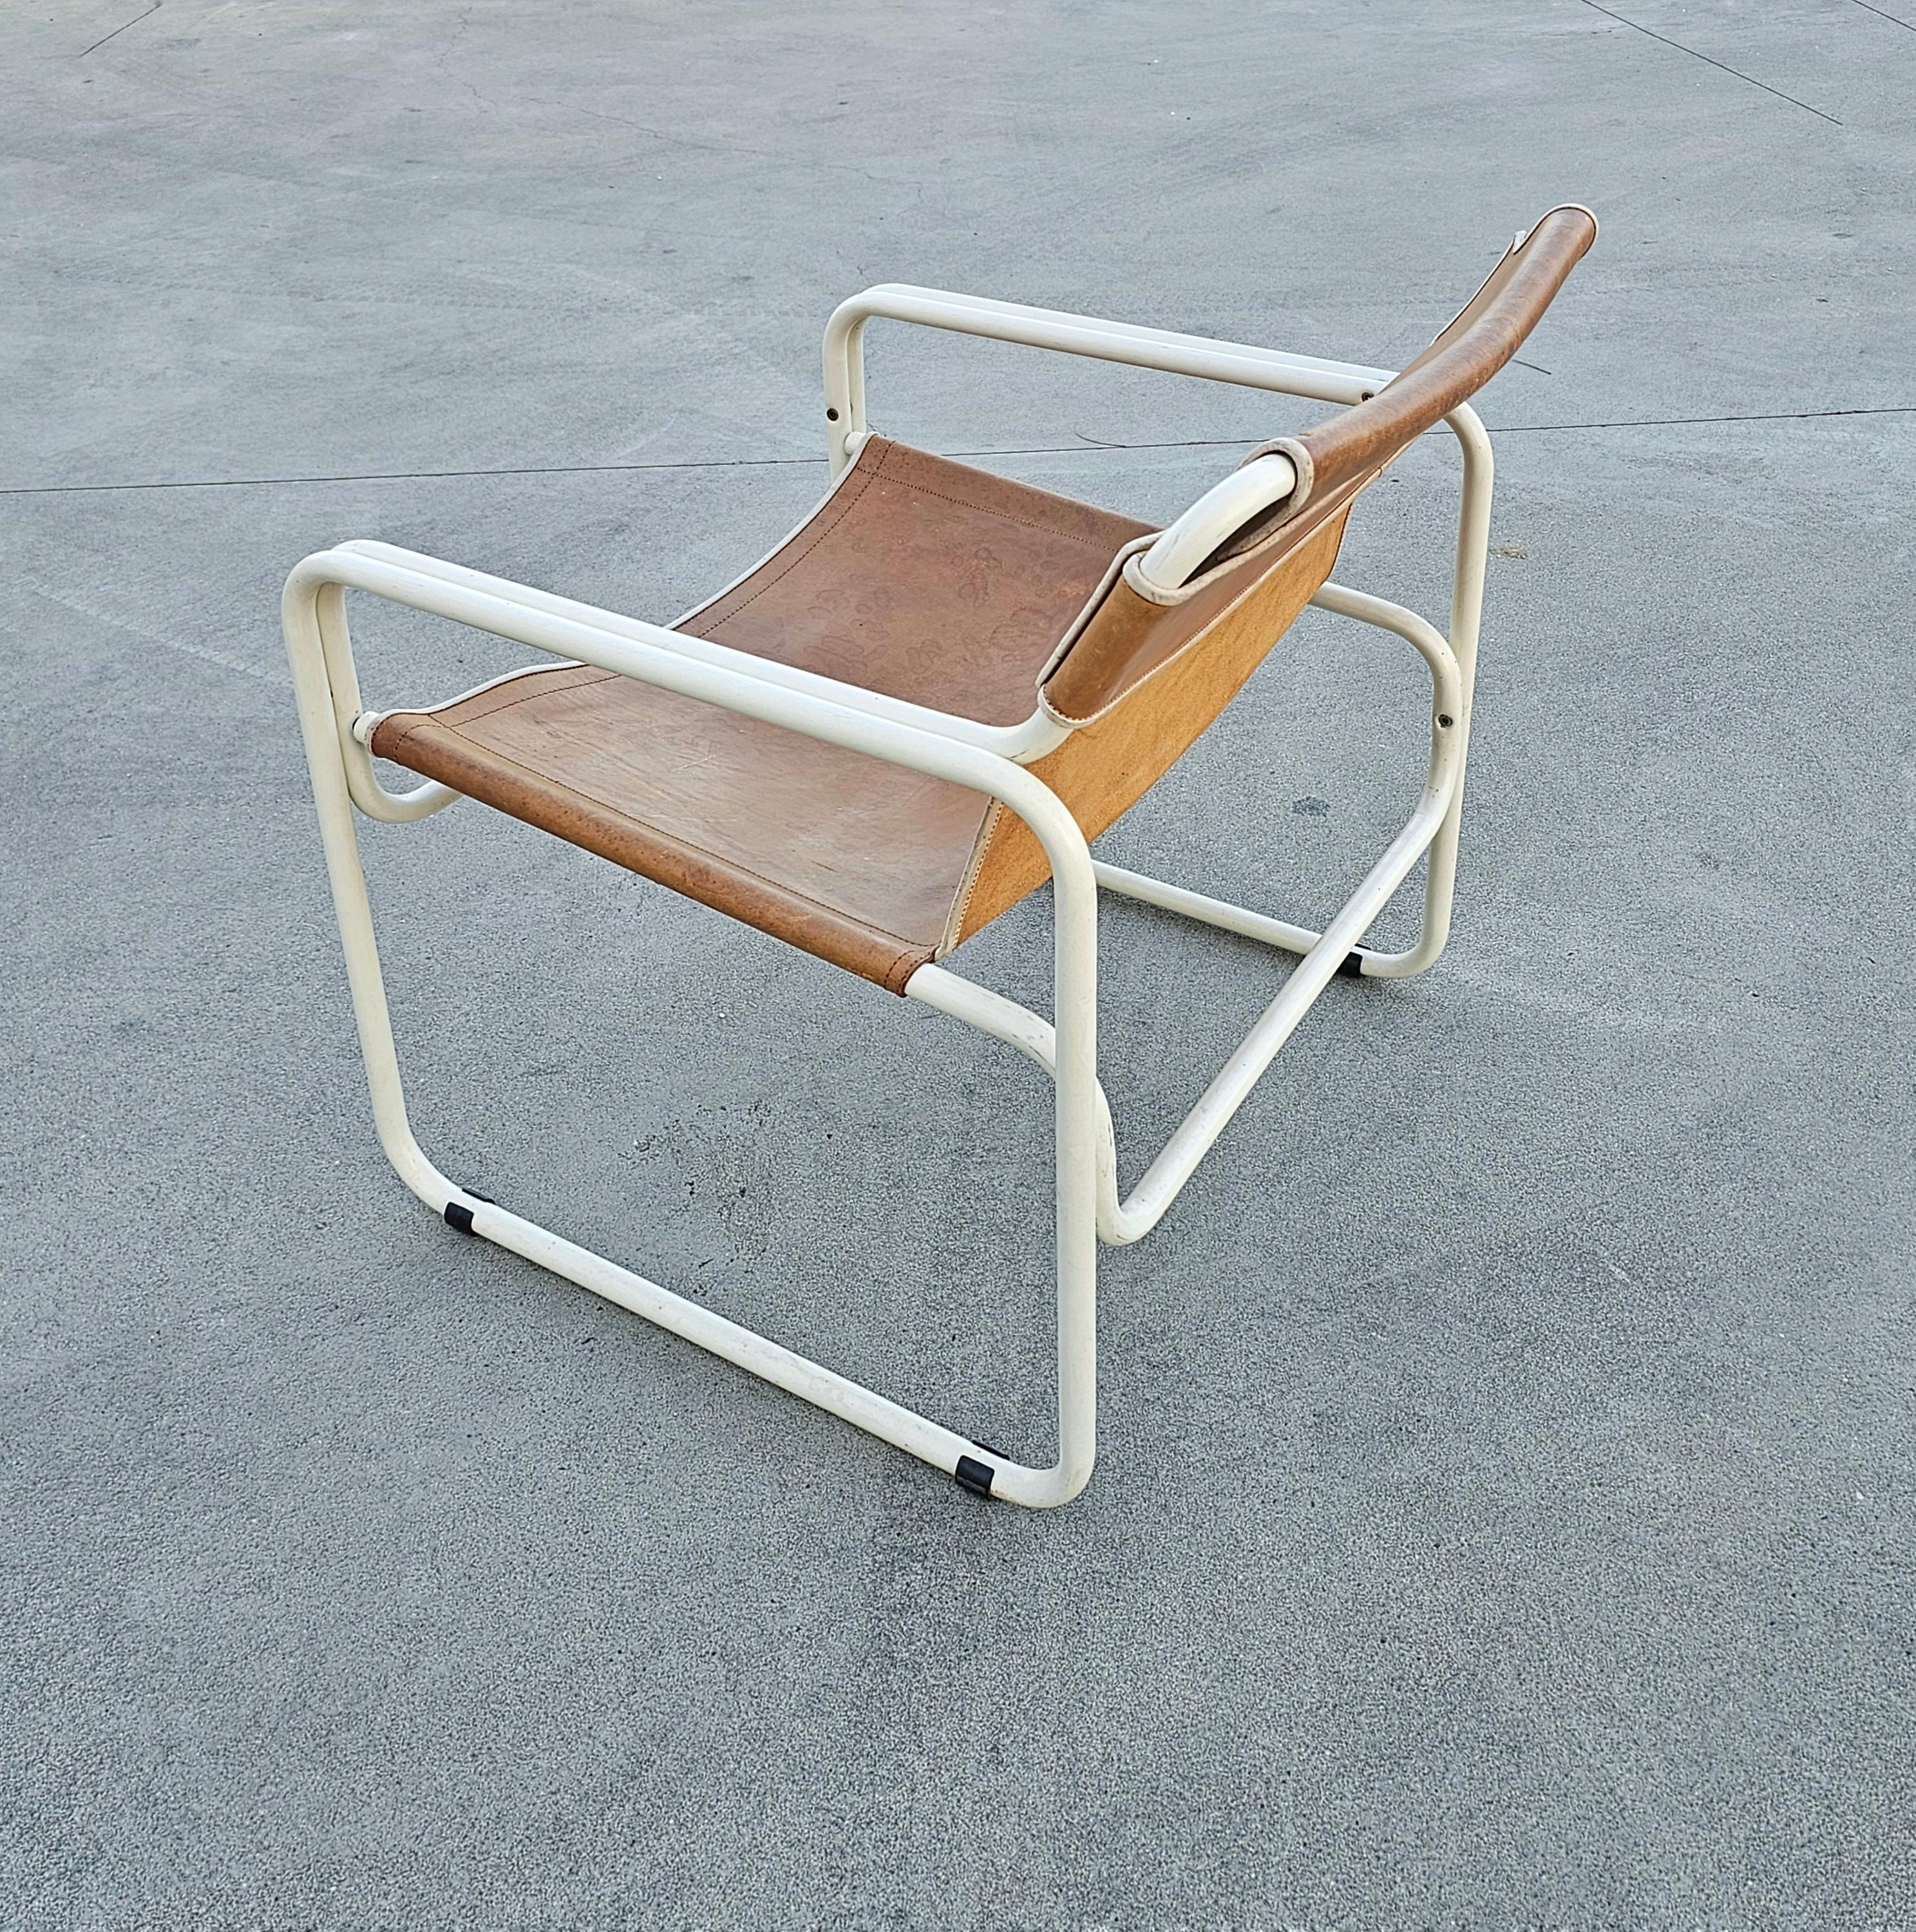 Dutch Bauhaus Style Tubular Easy Chairs in Cognac Leather by Jox Interni, 1970s For Sale